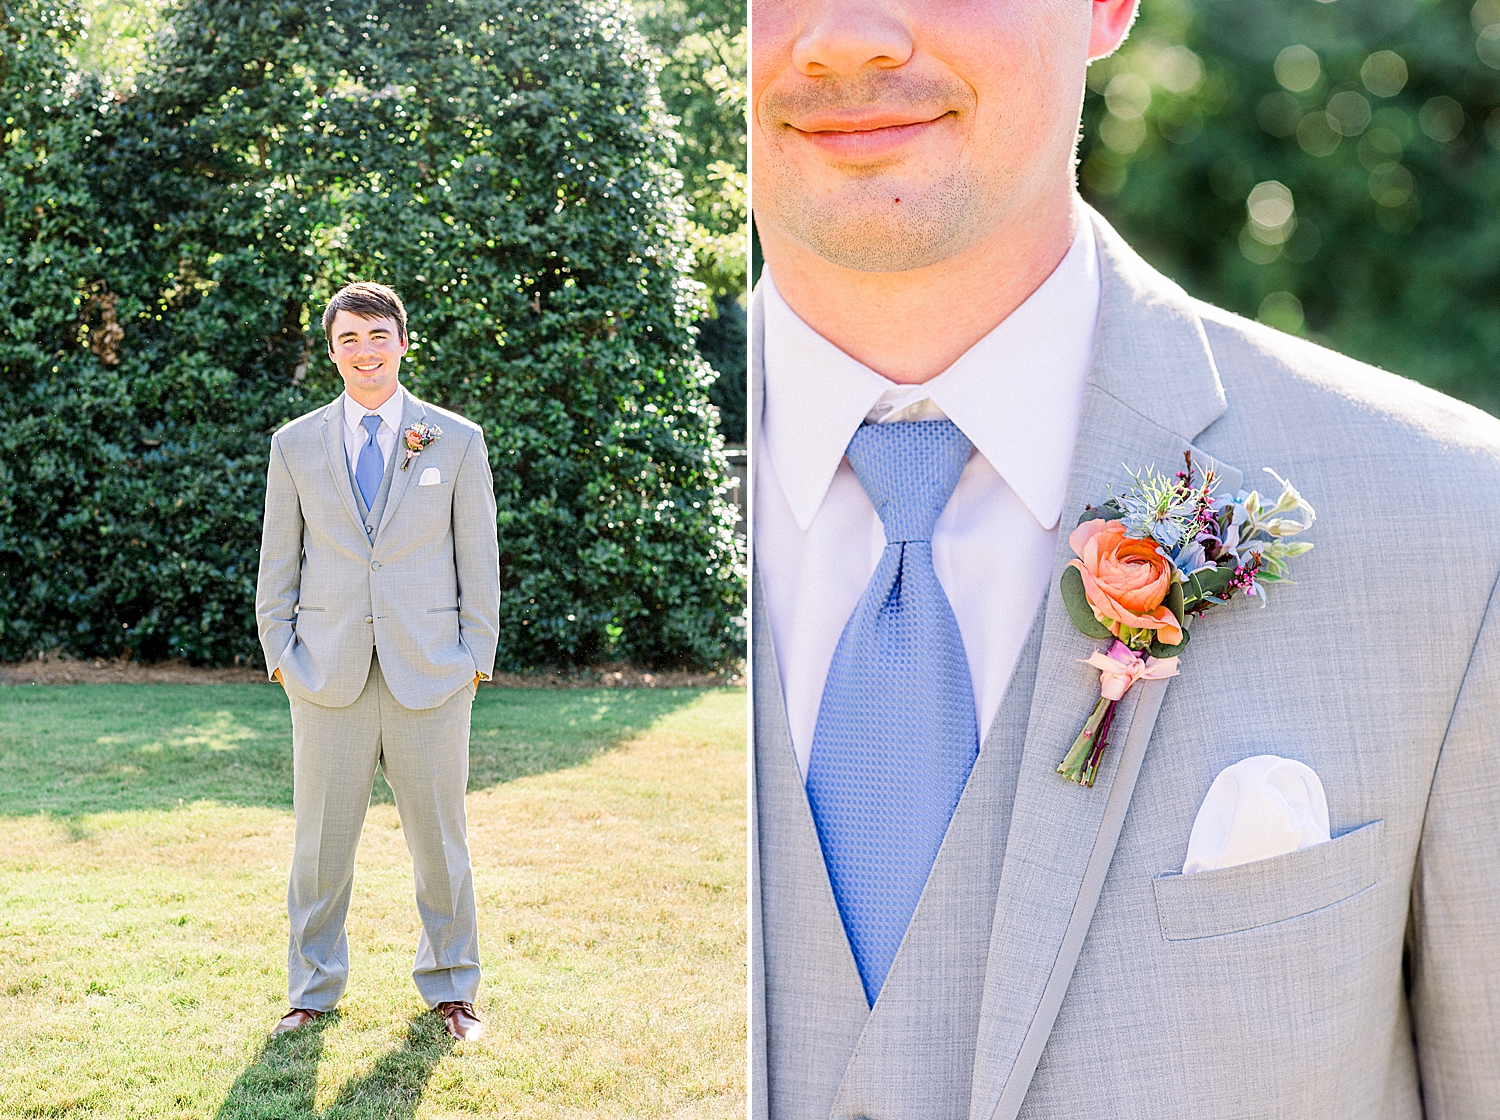 groom in grey suit with orange boutonnière